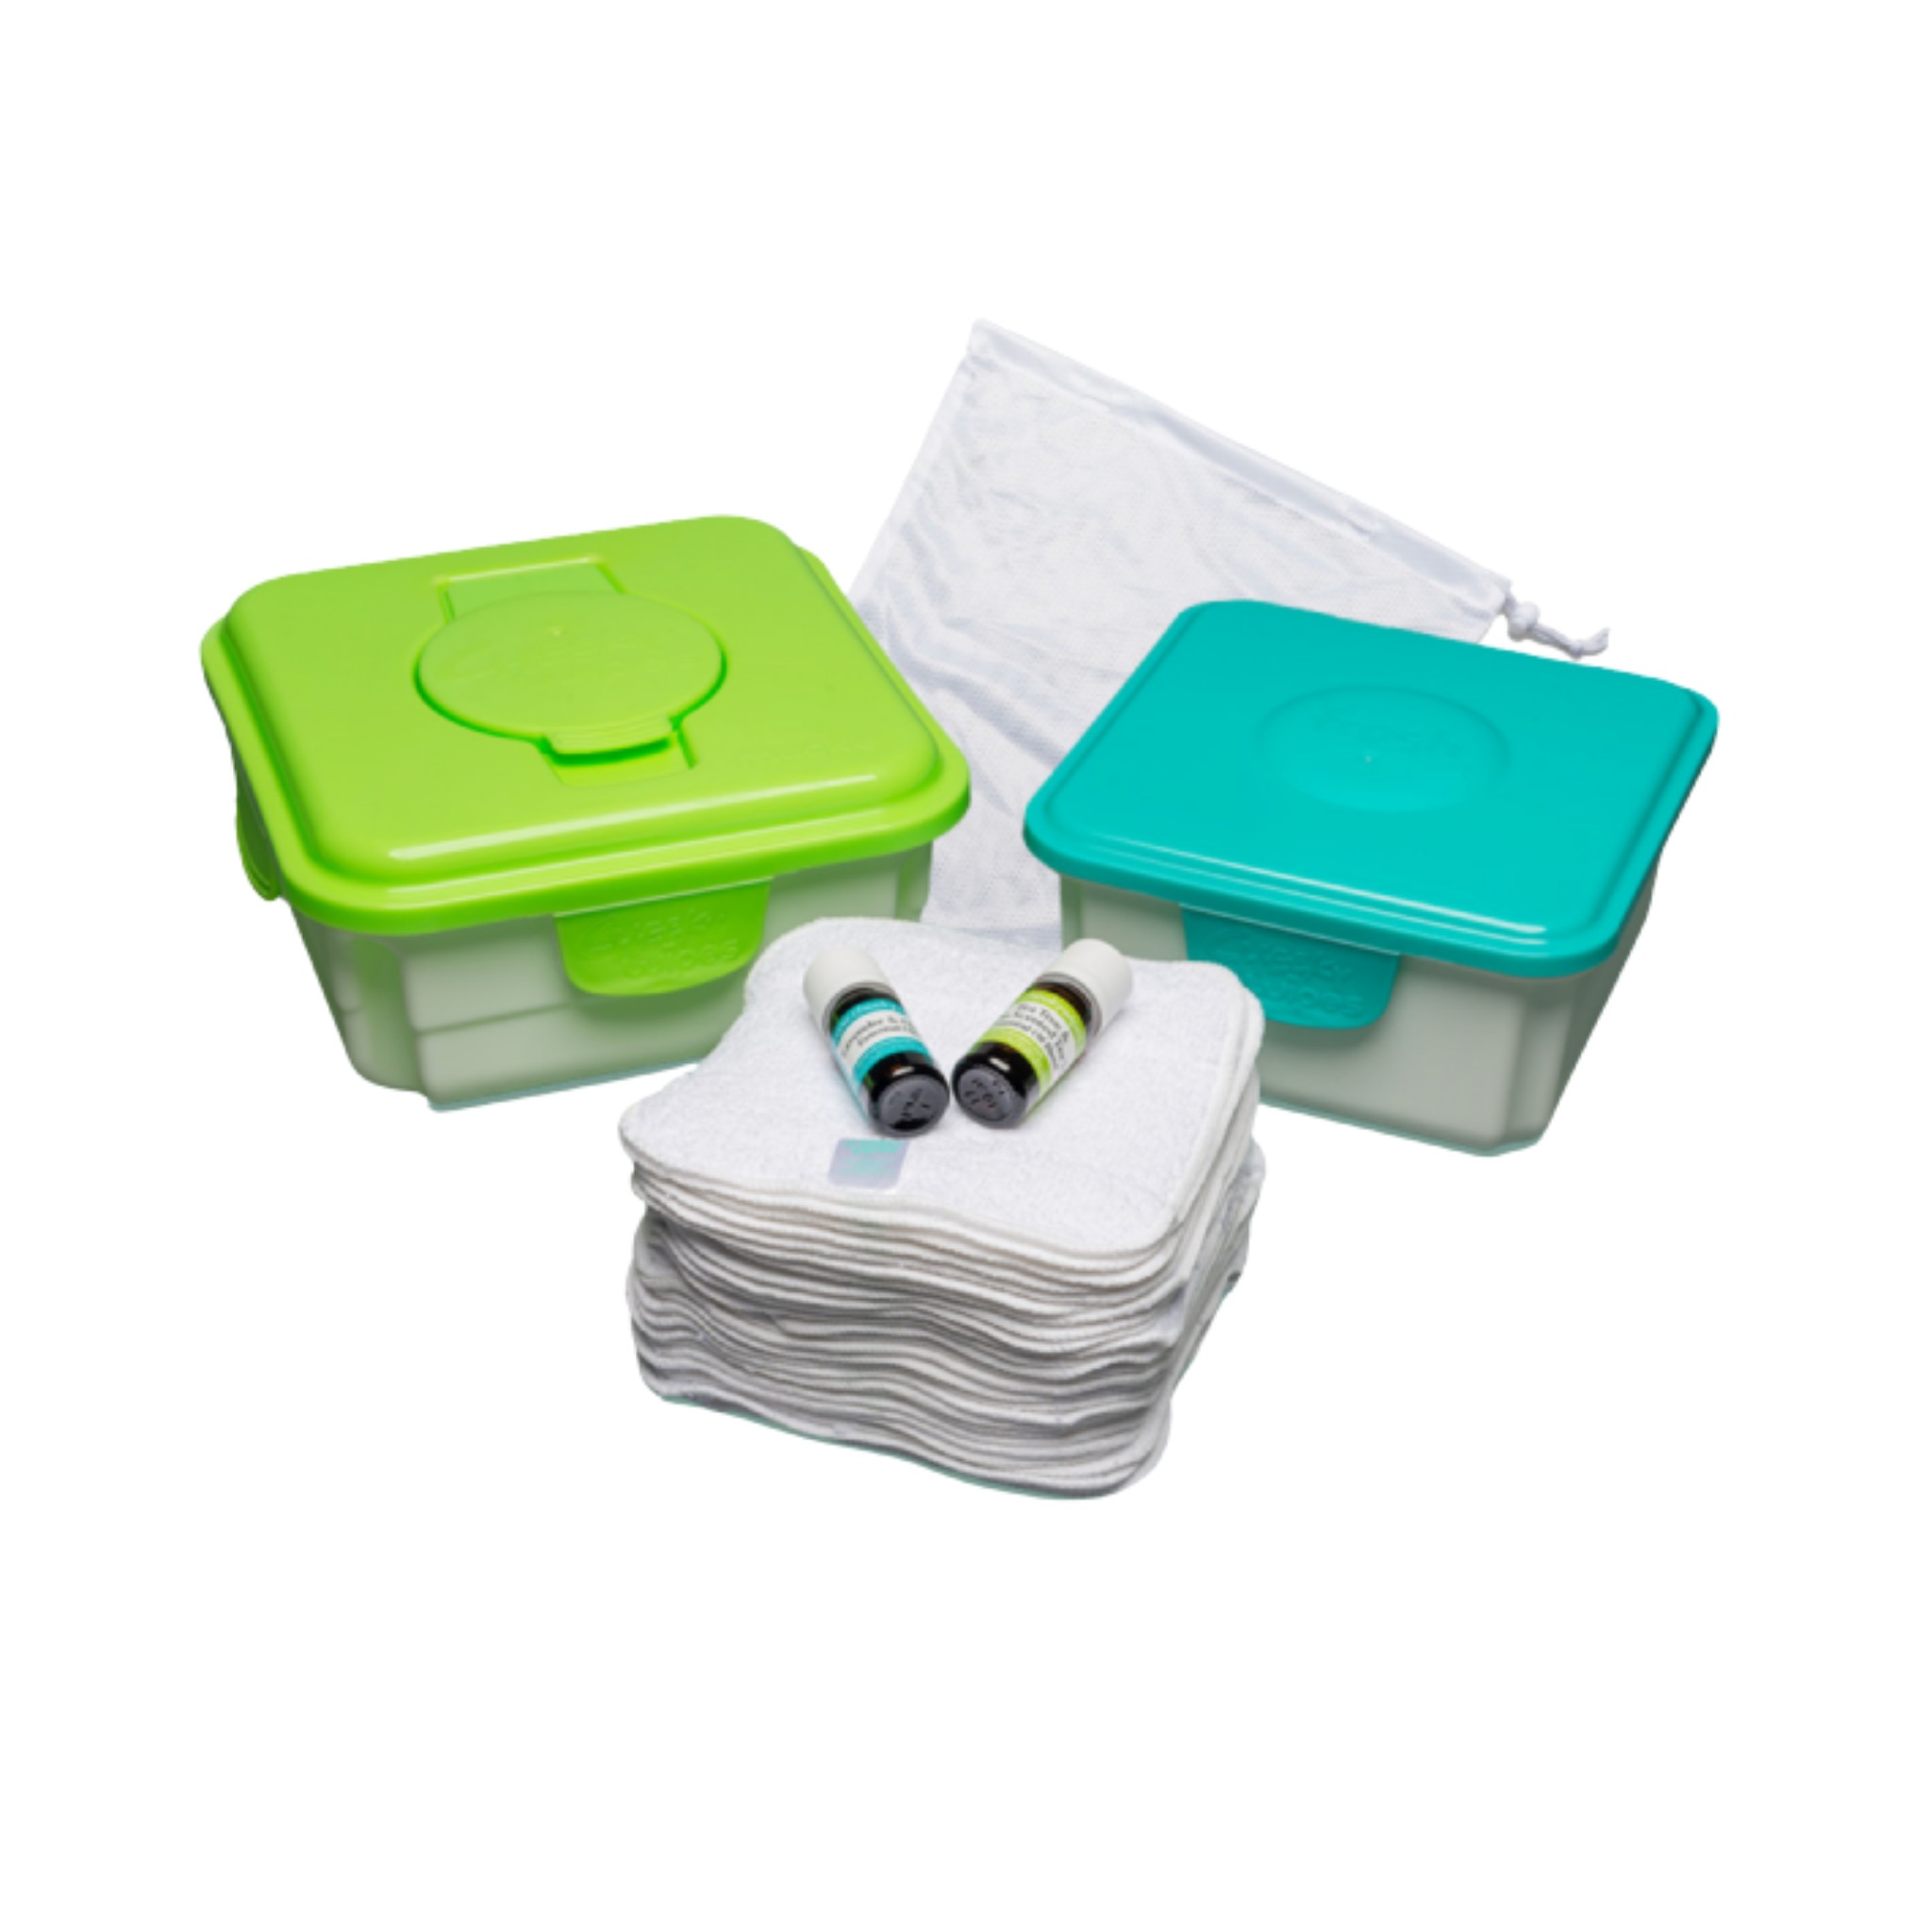 Using Reusable Wipes, Cheeky Wipes UK